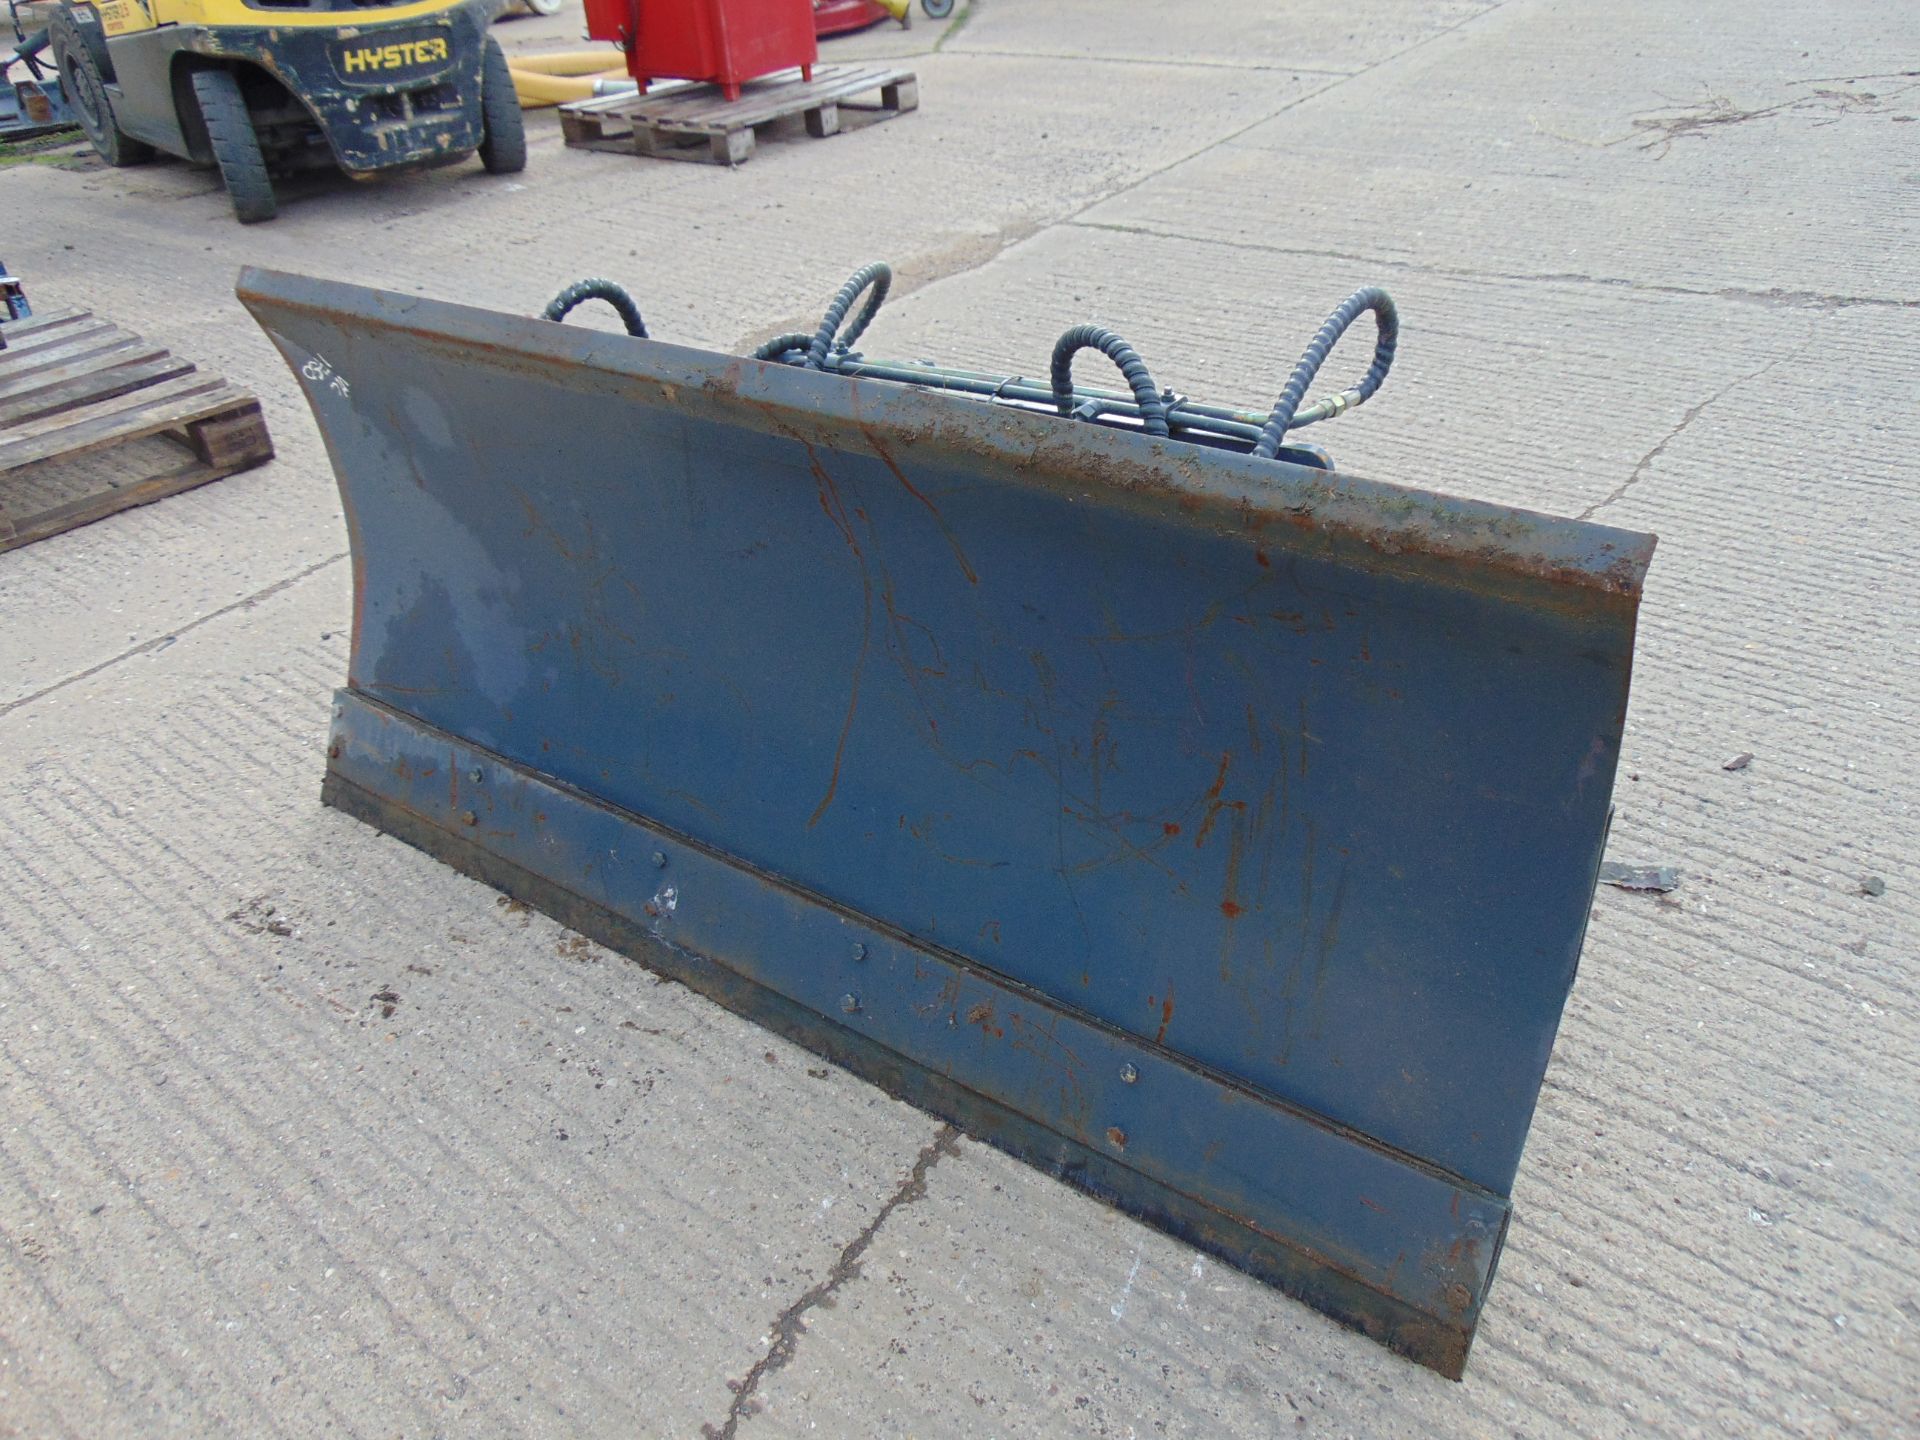 6' Hydraulic Snow Plough Blade for Telehandler, Forklift, Tractor Etc - Image 2 of 8